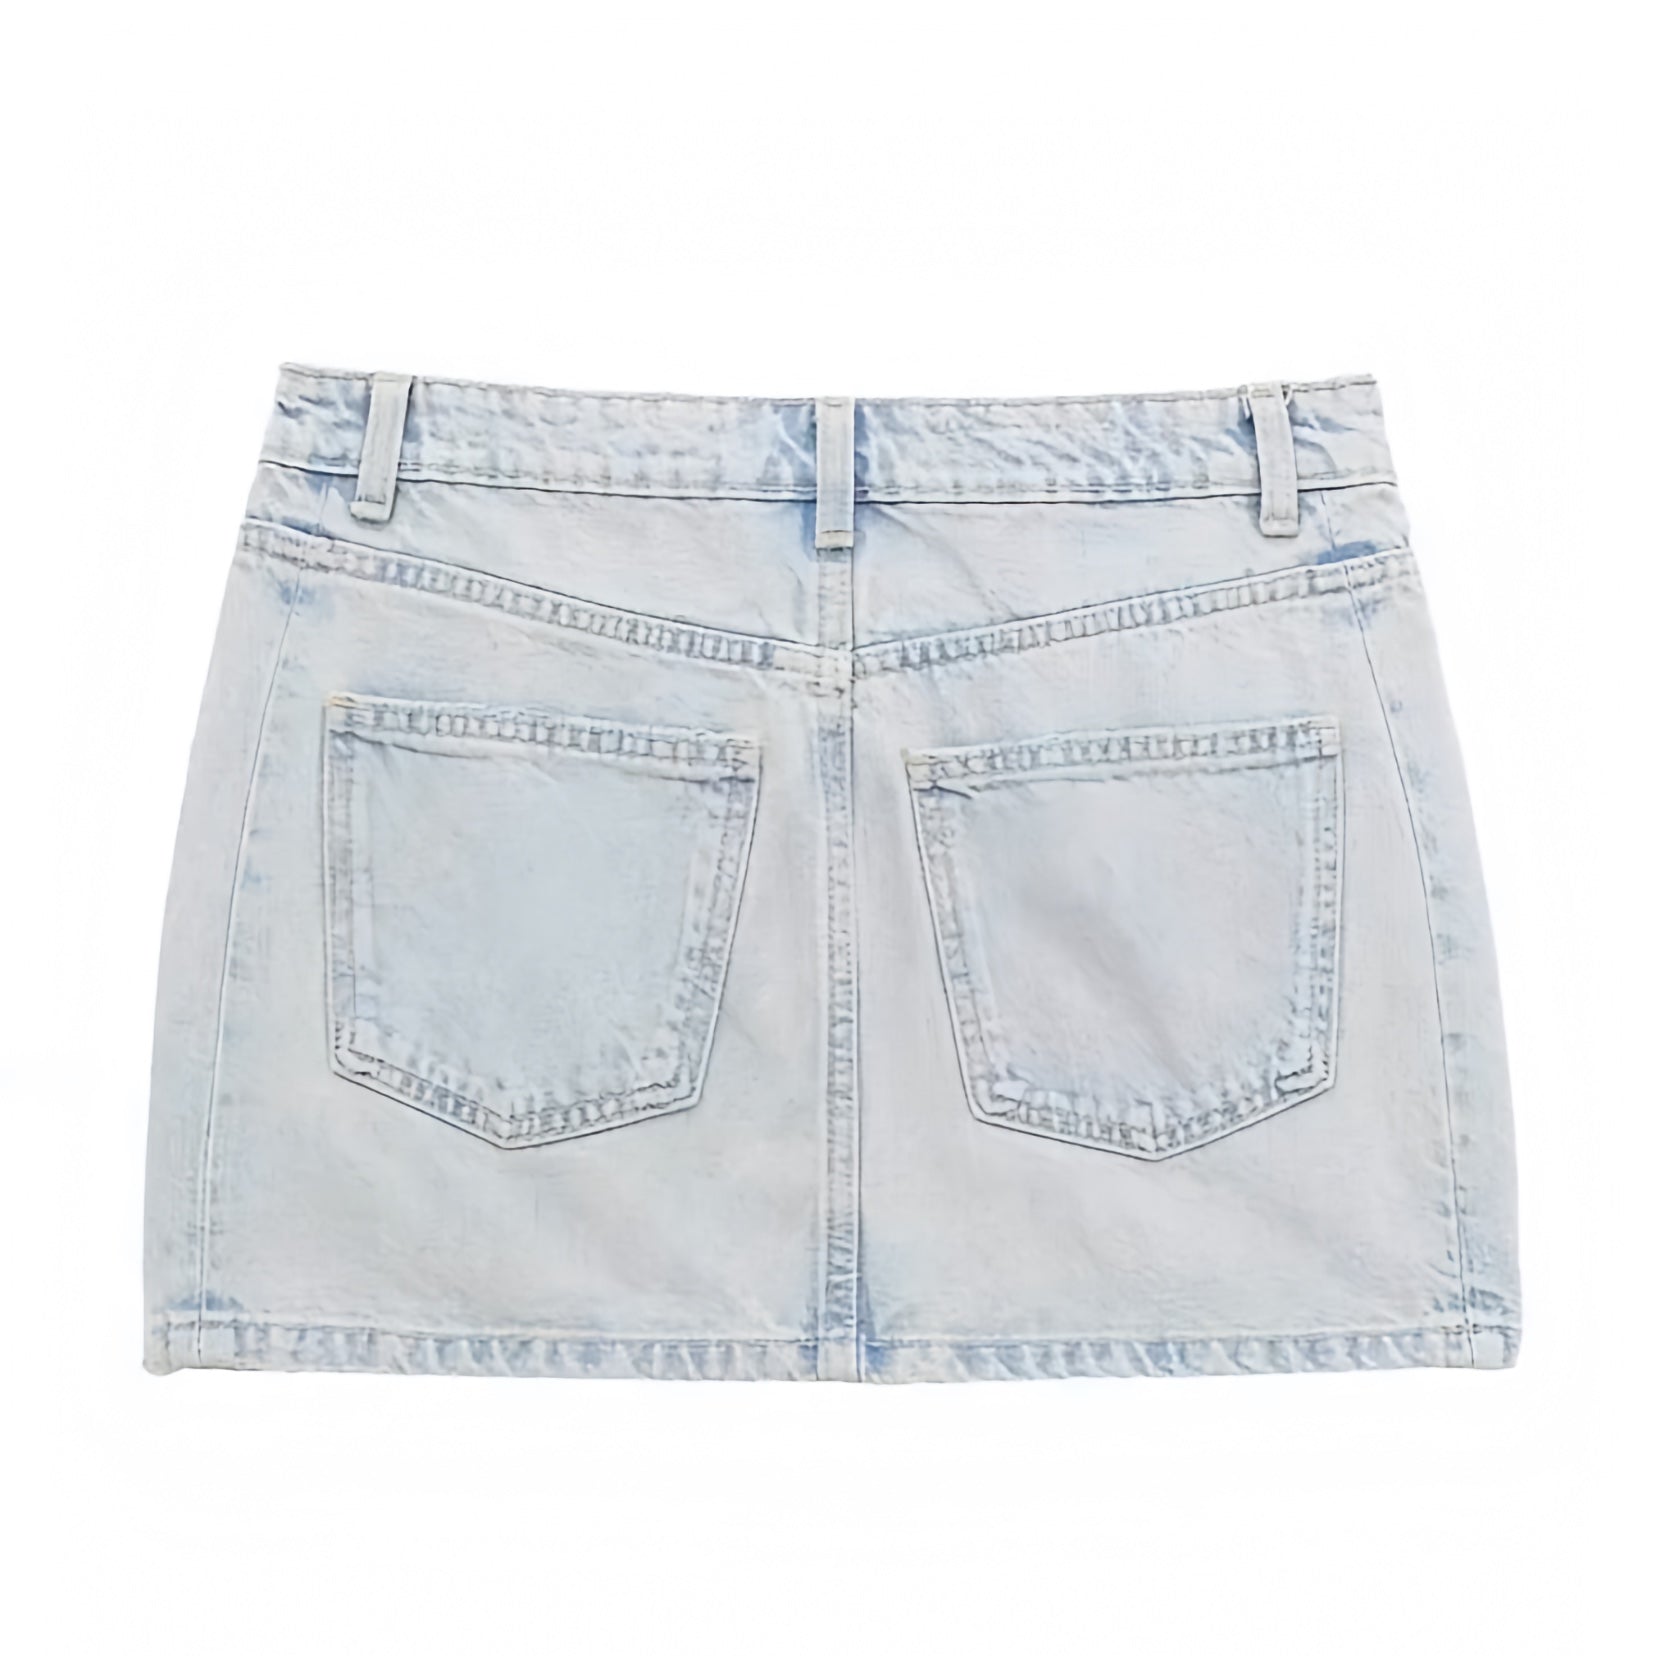 light-blue-bleach-wash-faded-distressed-vintage-retro-slim-fit-low-rise-waisted-tight-fitting-micro-mini-short-denim-jean-skirt-skort-with-pockets-women-ladies-teens-tweens-chic-trendy-spring-2024-summer-casual-feminine-western-y2k-cocktail-party-sexy-date-night-out-club-wear-90s-minimalist-minimalism-stockholm-style-skirts-zara-revolve-aritzia-reformation-dupe